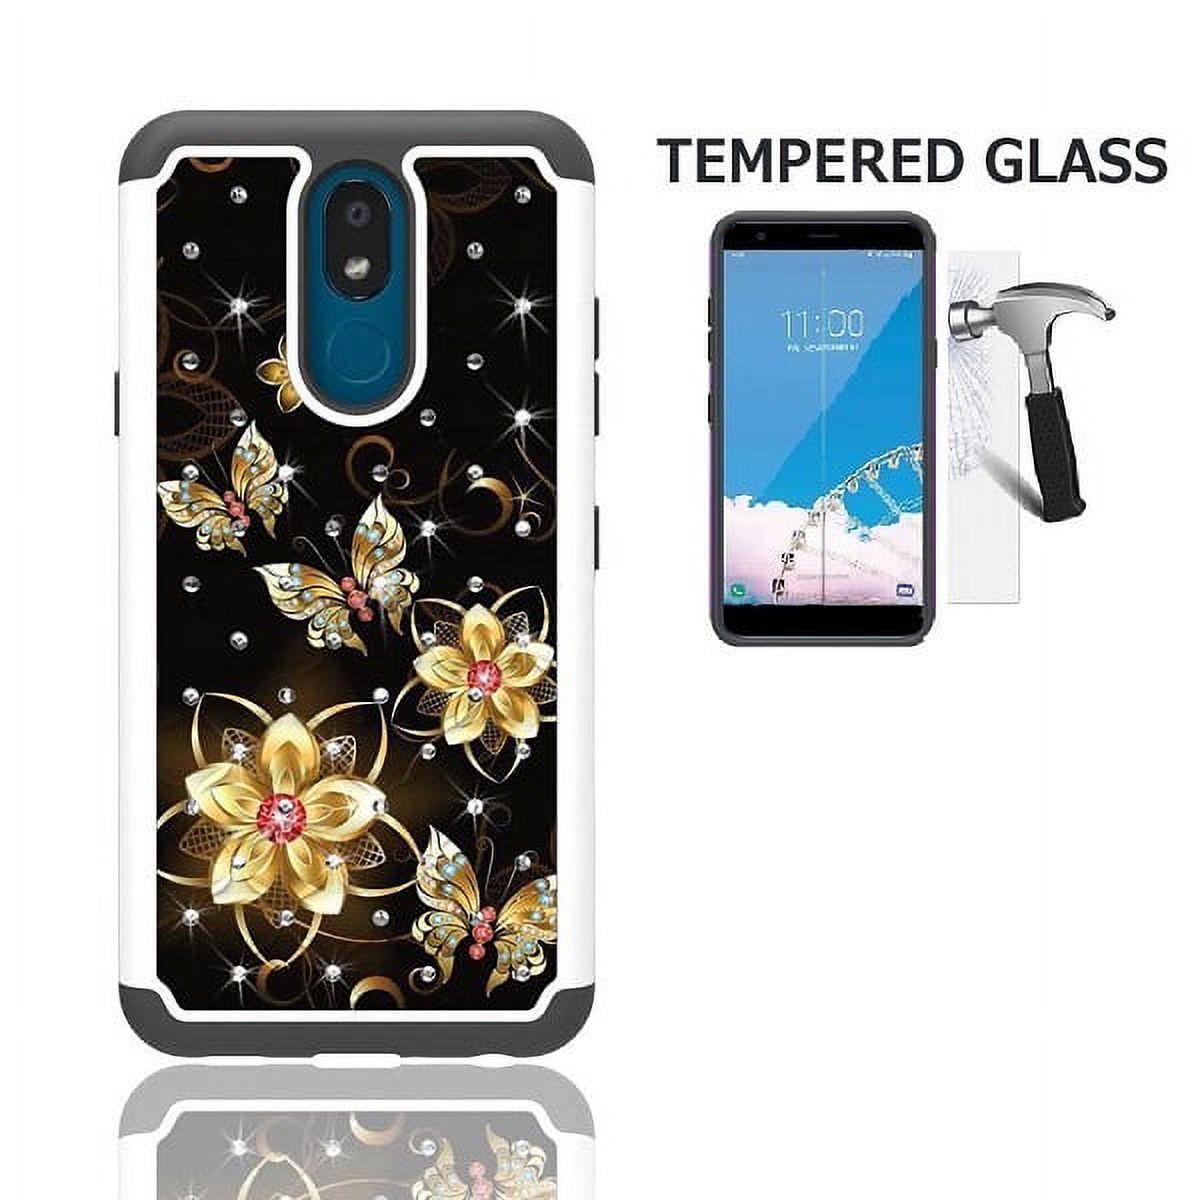 Phone Case for LG Prime 2/ LG Aristo 4 Plus / Straight Talk LG Journey Smartphone / LG Journey /LG Arena 2 / LG Escape Plus, Crystal Bling Shock-Resistant Case (Black Gold Butterfly- Tempered Glass) - image 1 of 4